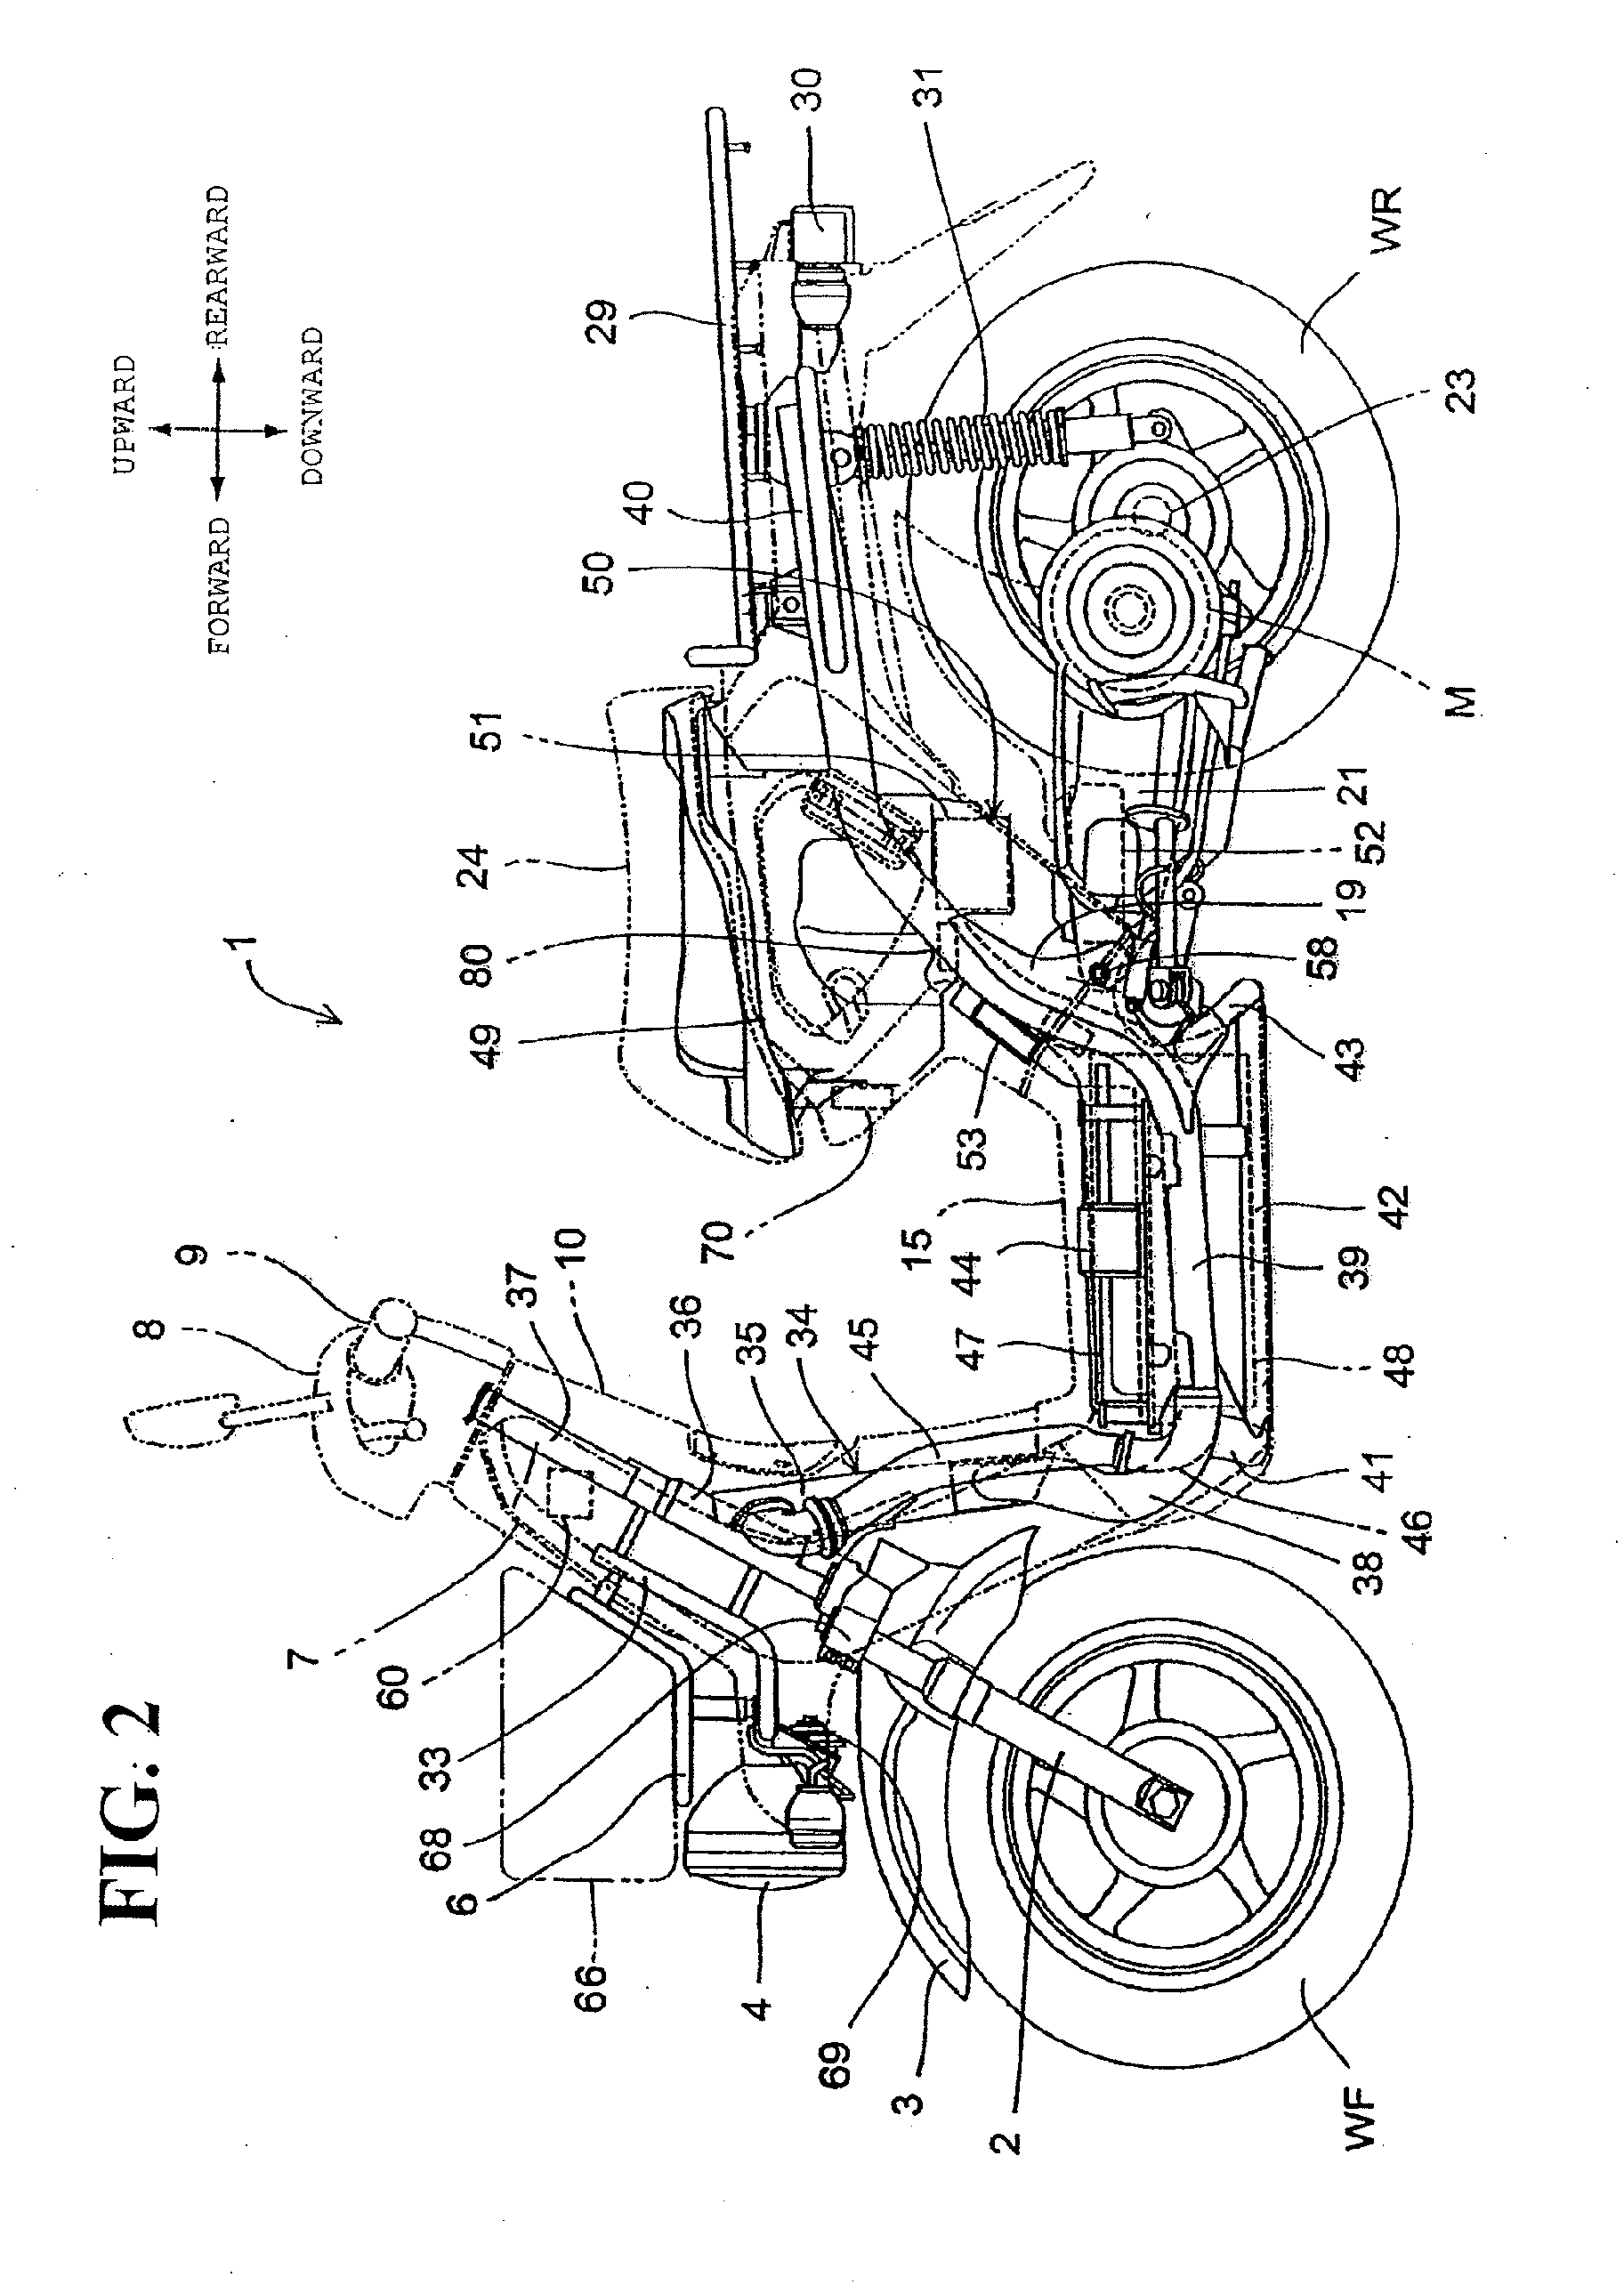 Vehicle approach notification control apparatus for electric motorcycle